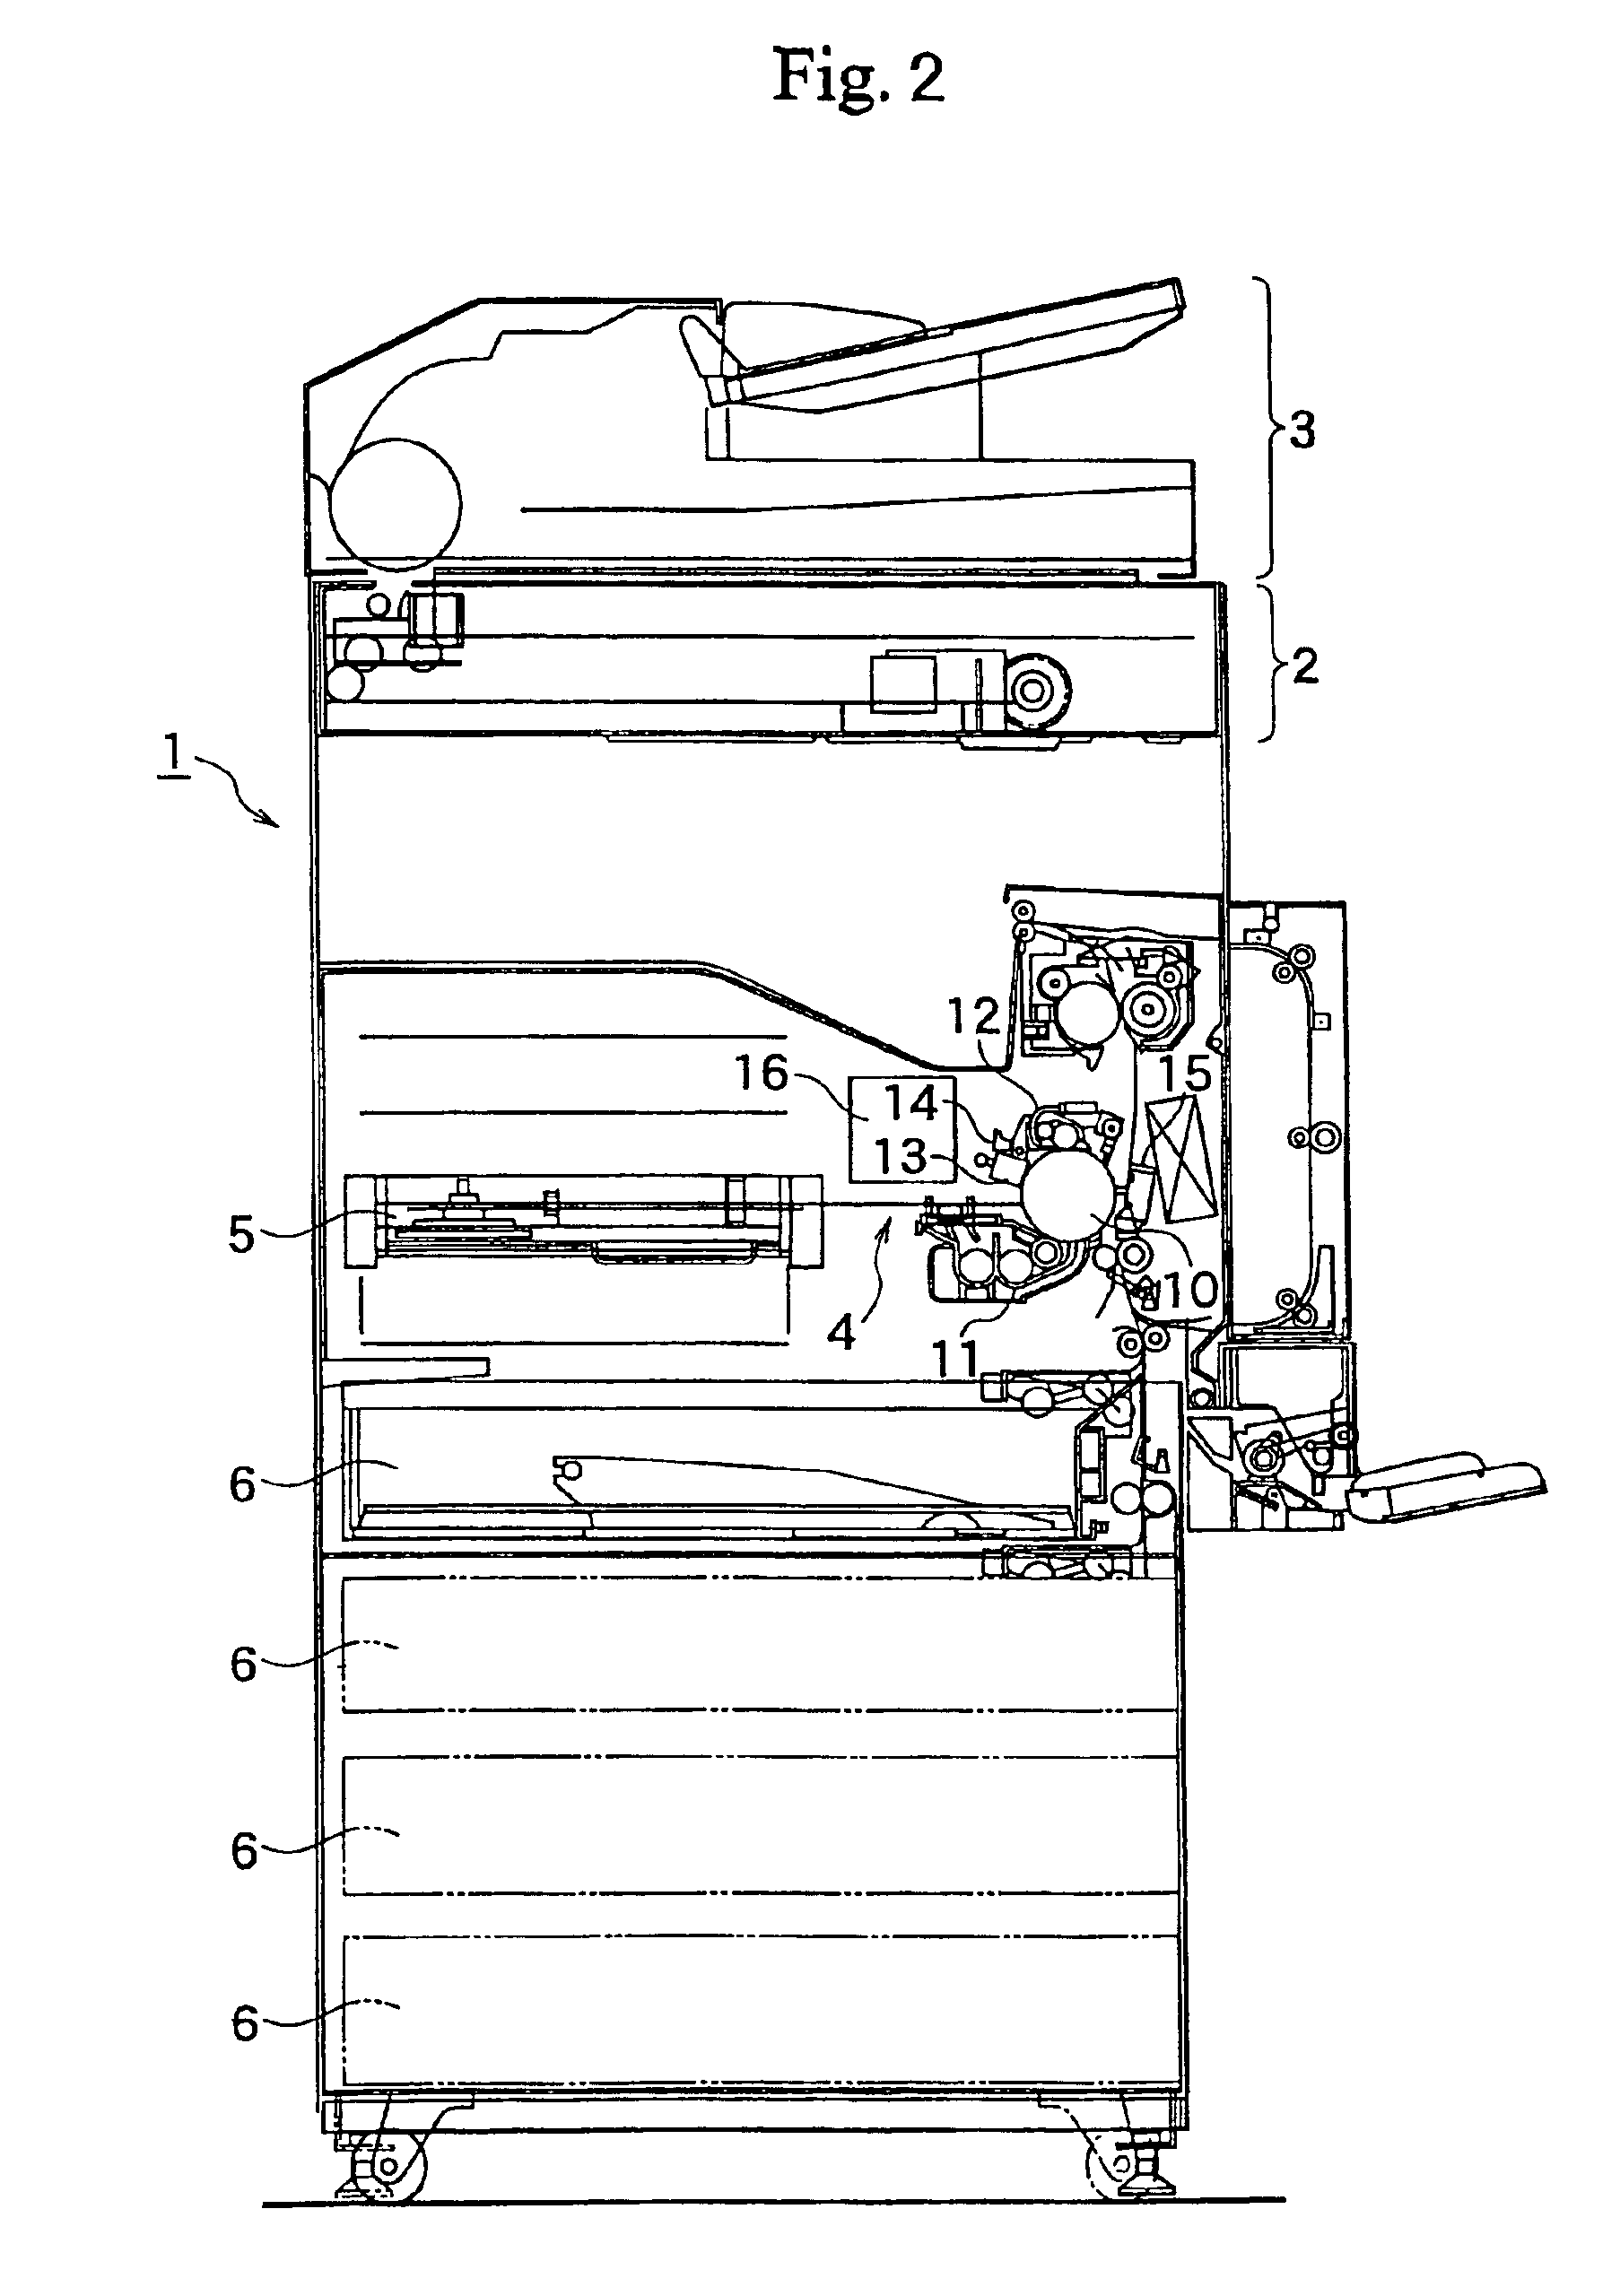 Replaceable toner cartridge for use with an image forming apparatus